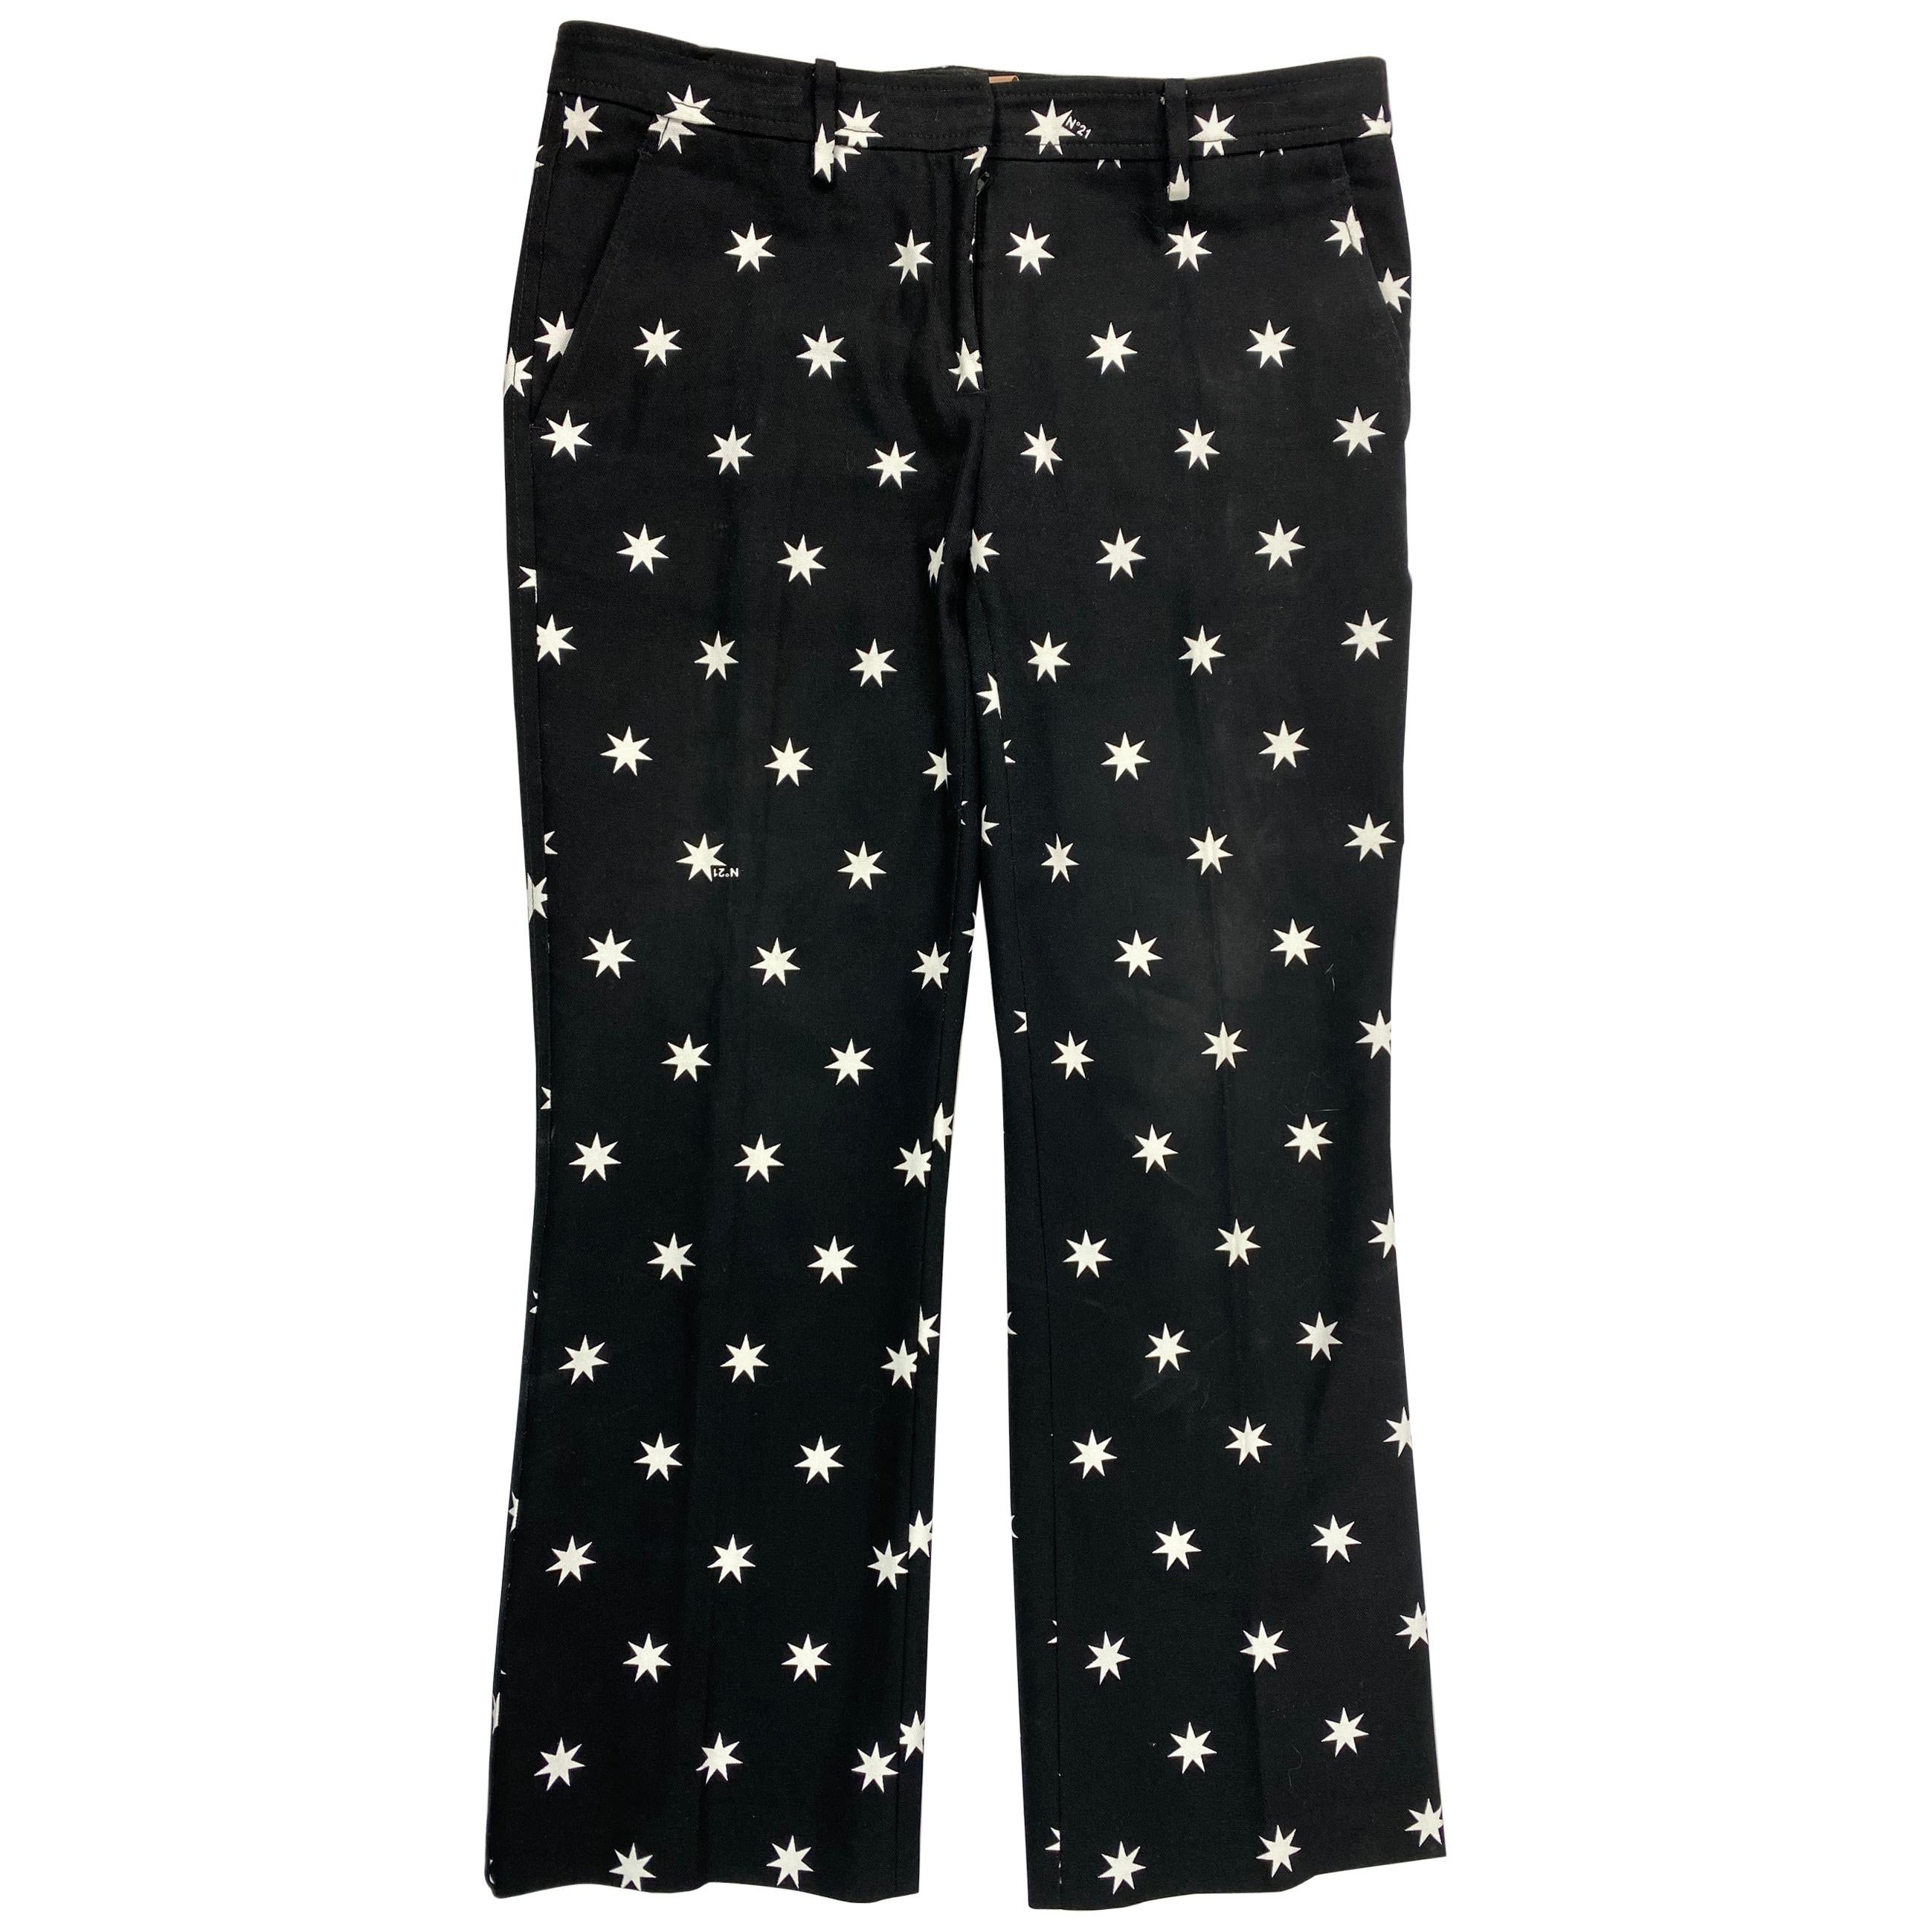 NO. 21 Black and White Cotton Star Pants, Size 44 For Sale